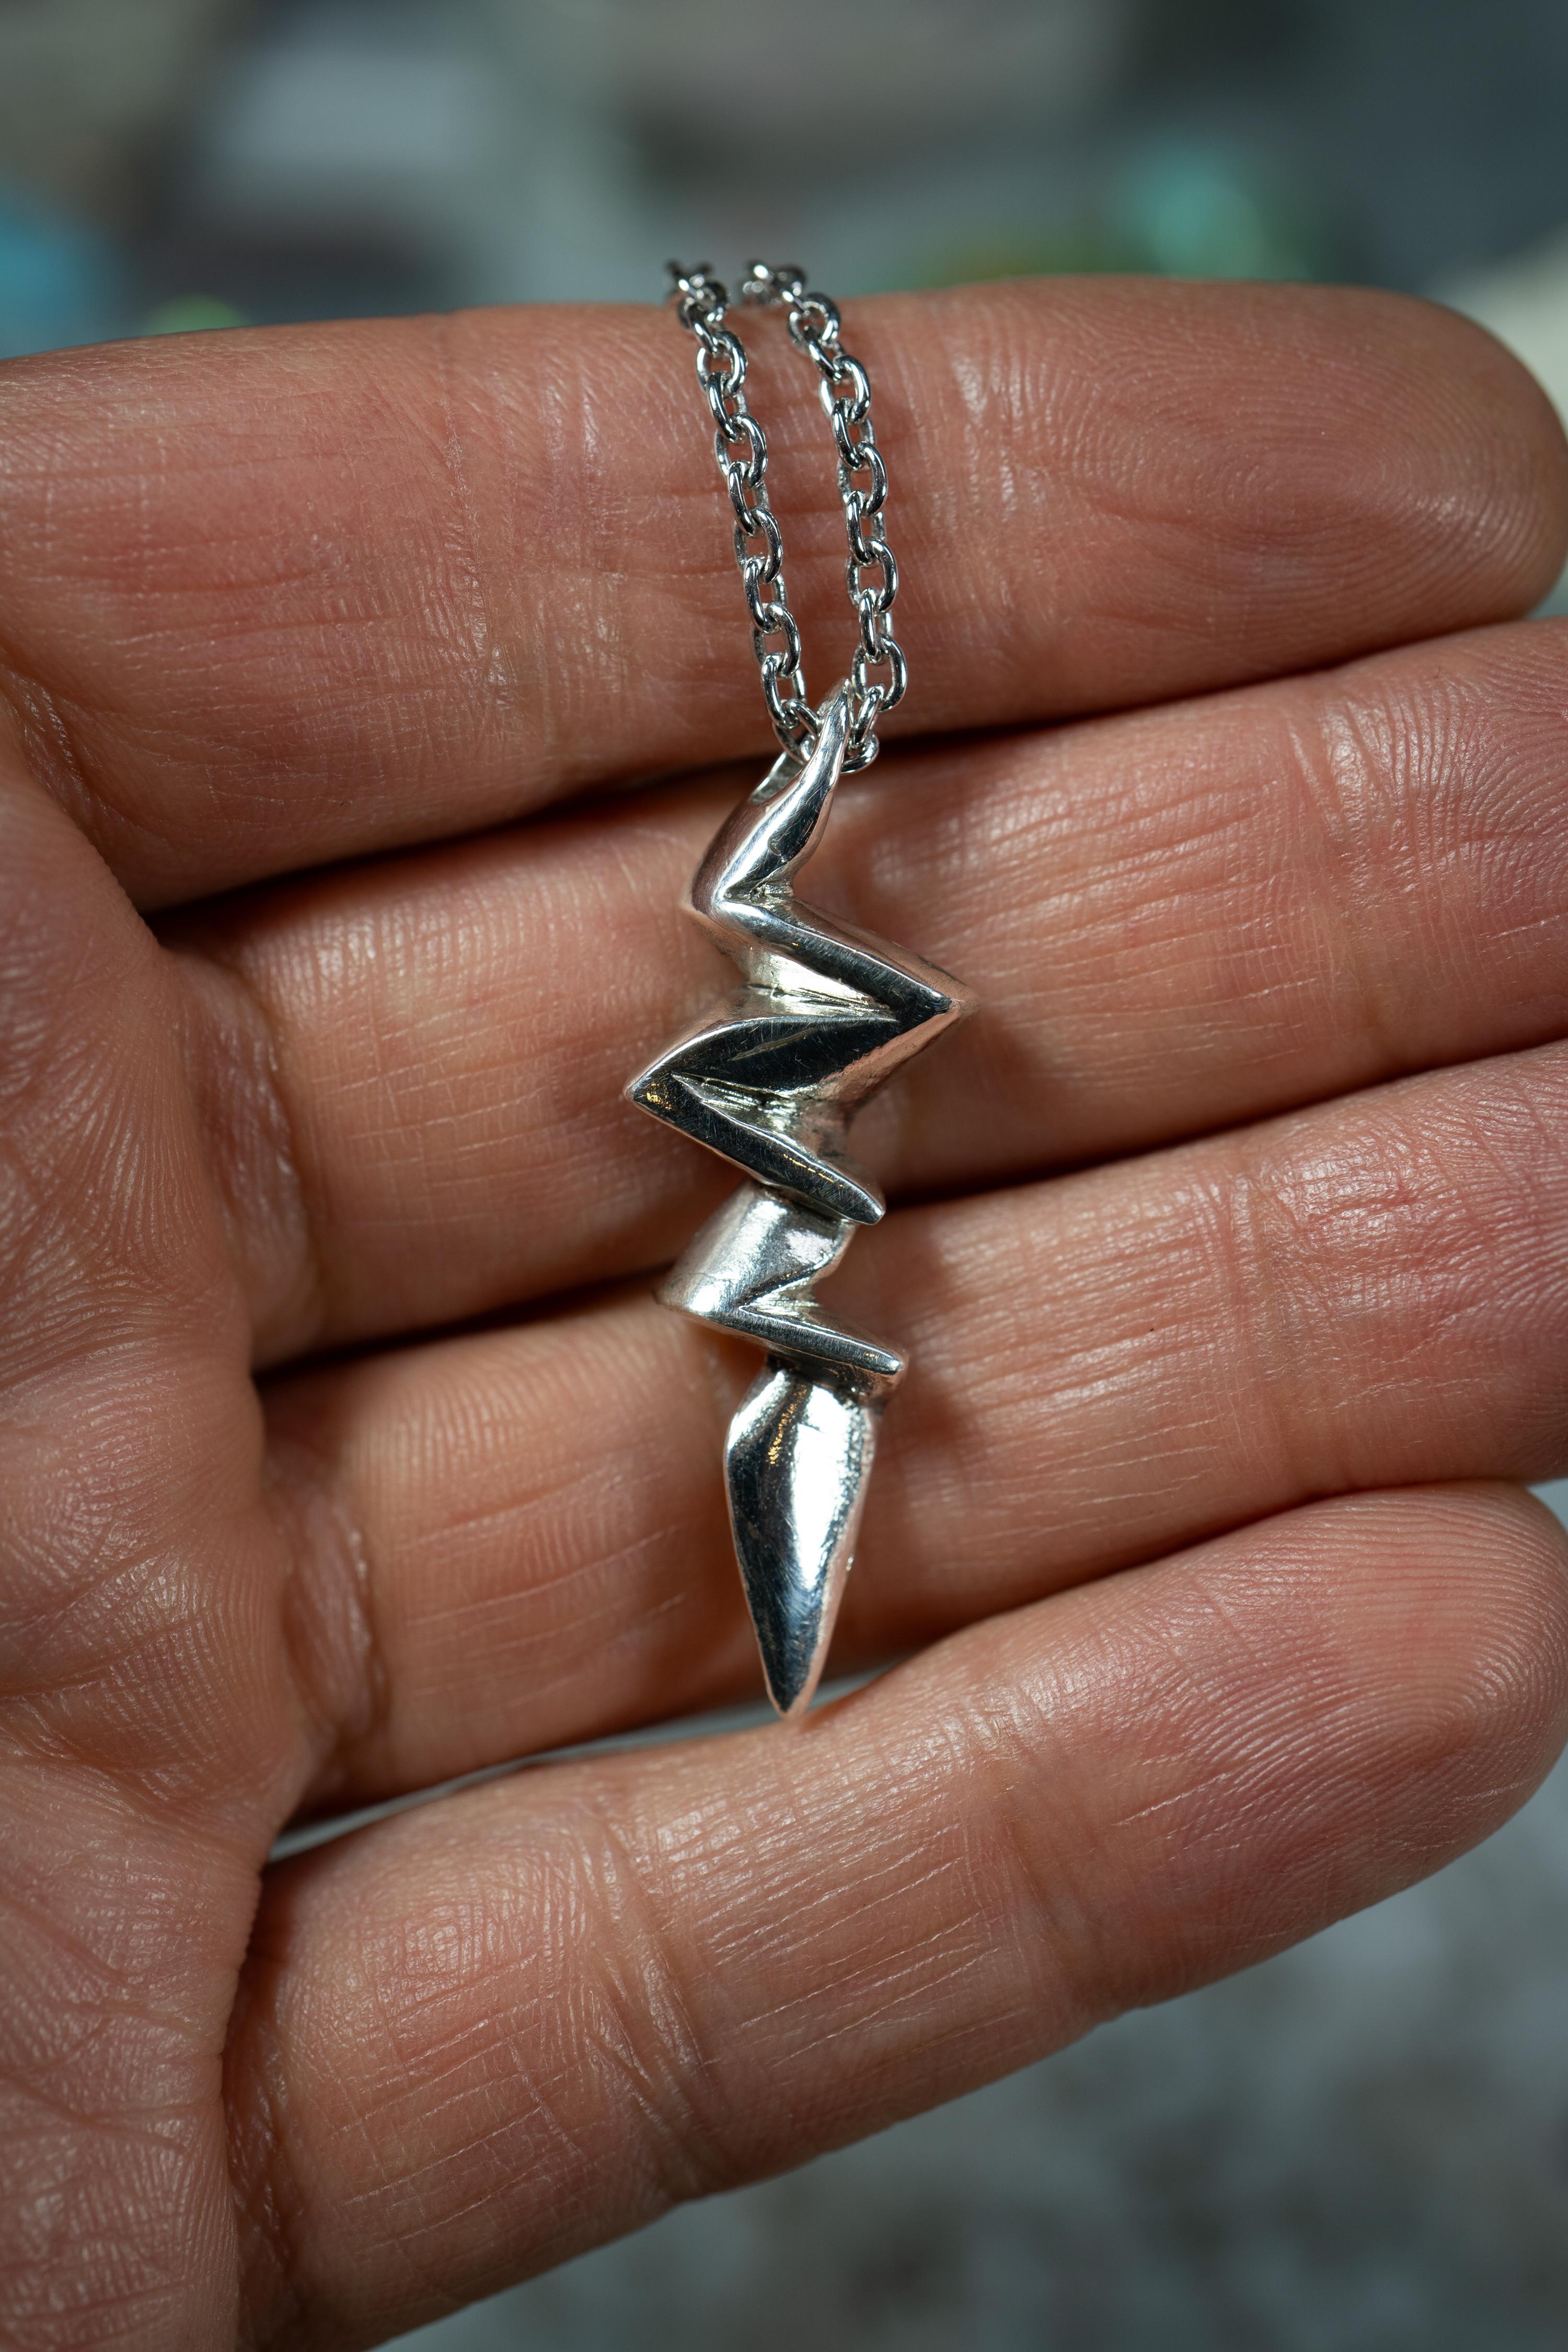 Lightning Bolt pendant by Ken Fury is hand-carved and cast. This pendant symbolizes nature's raw power, beauty, and transformative and illuminating qualities.

Available in 18K Solid White or Yellow Gold. Send a message to specify which one you